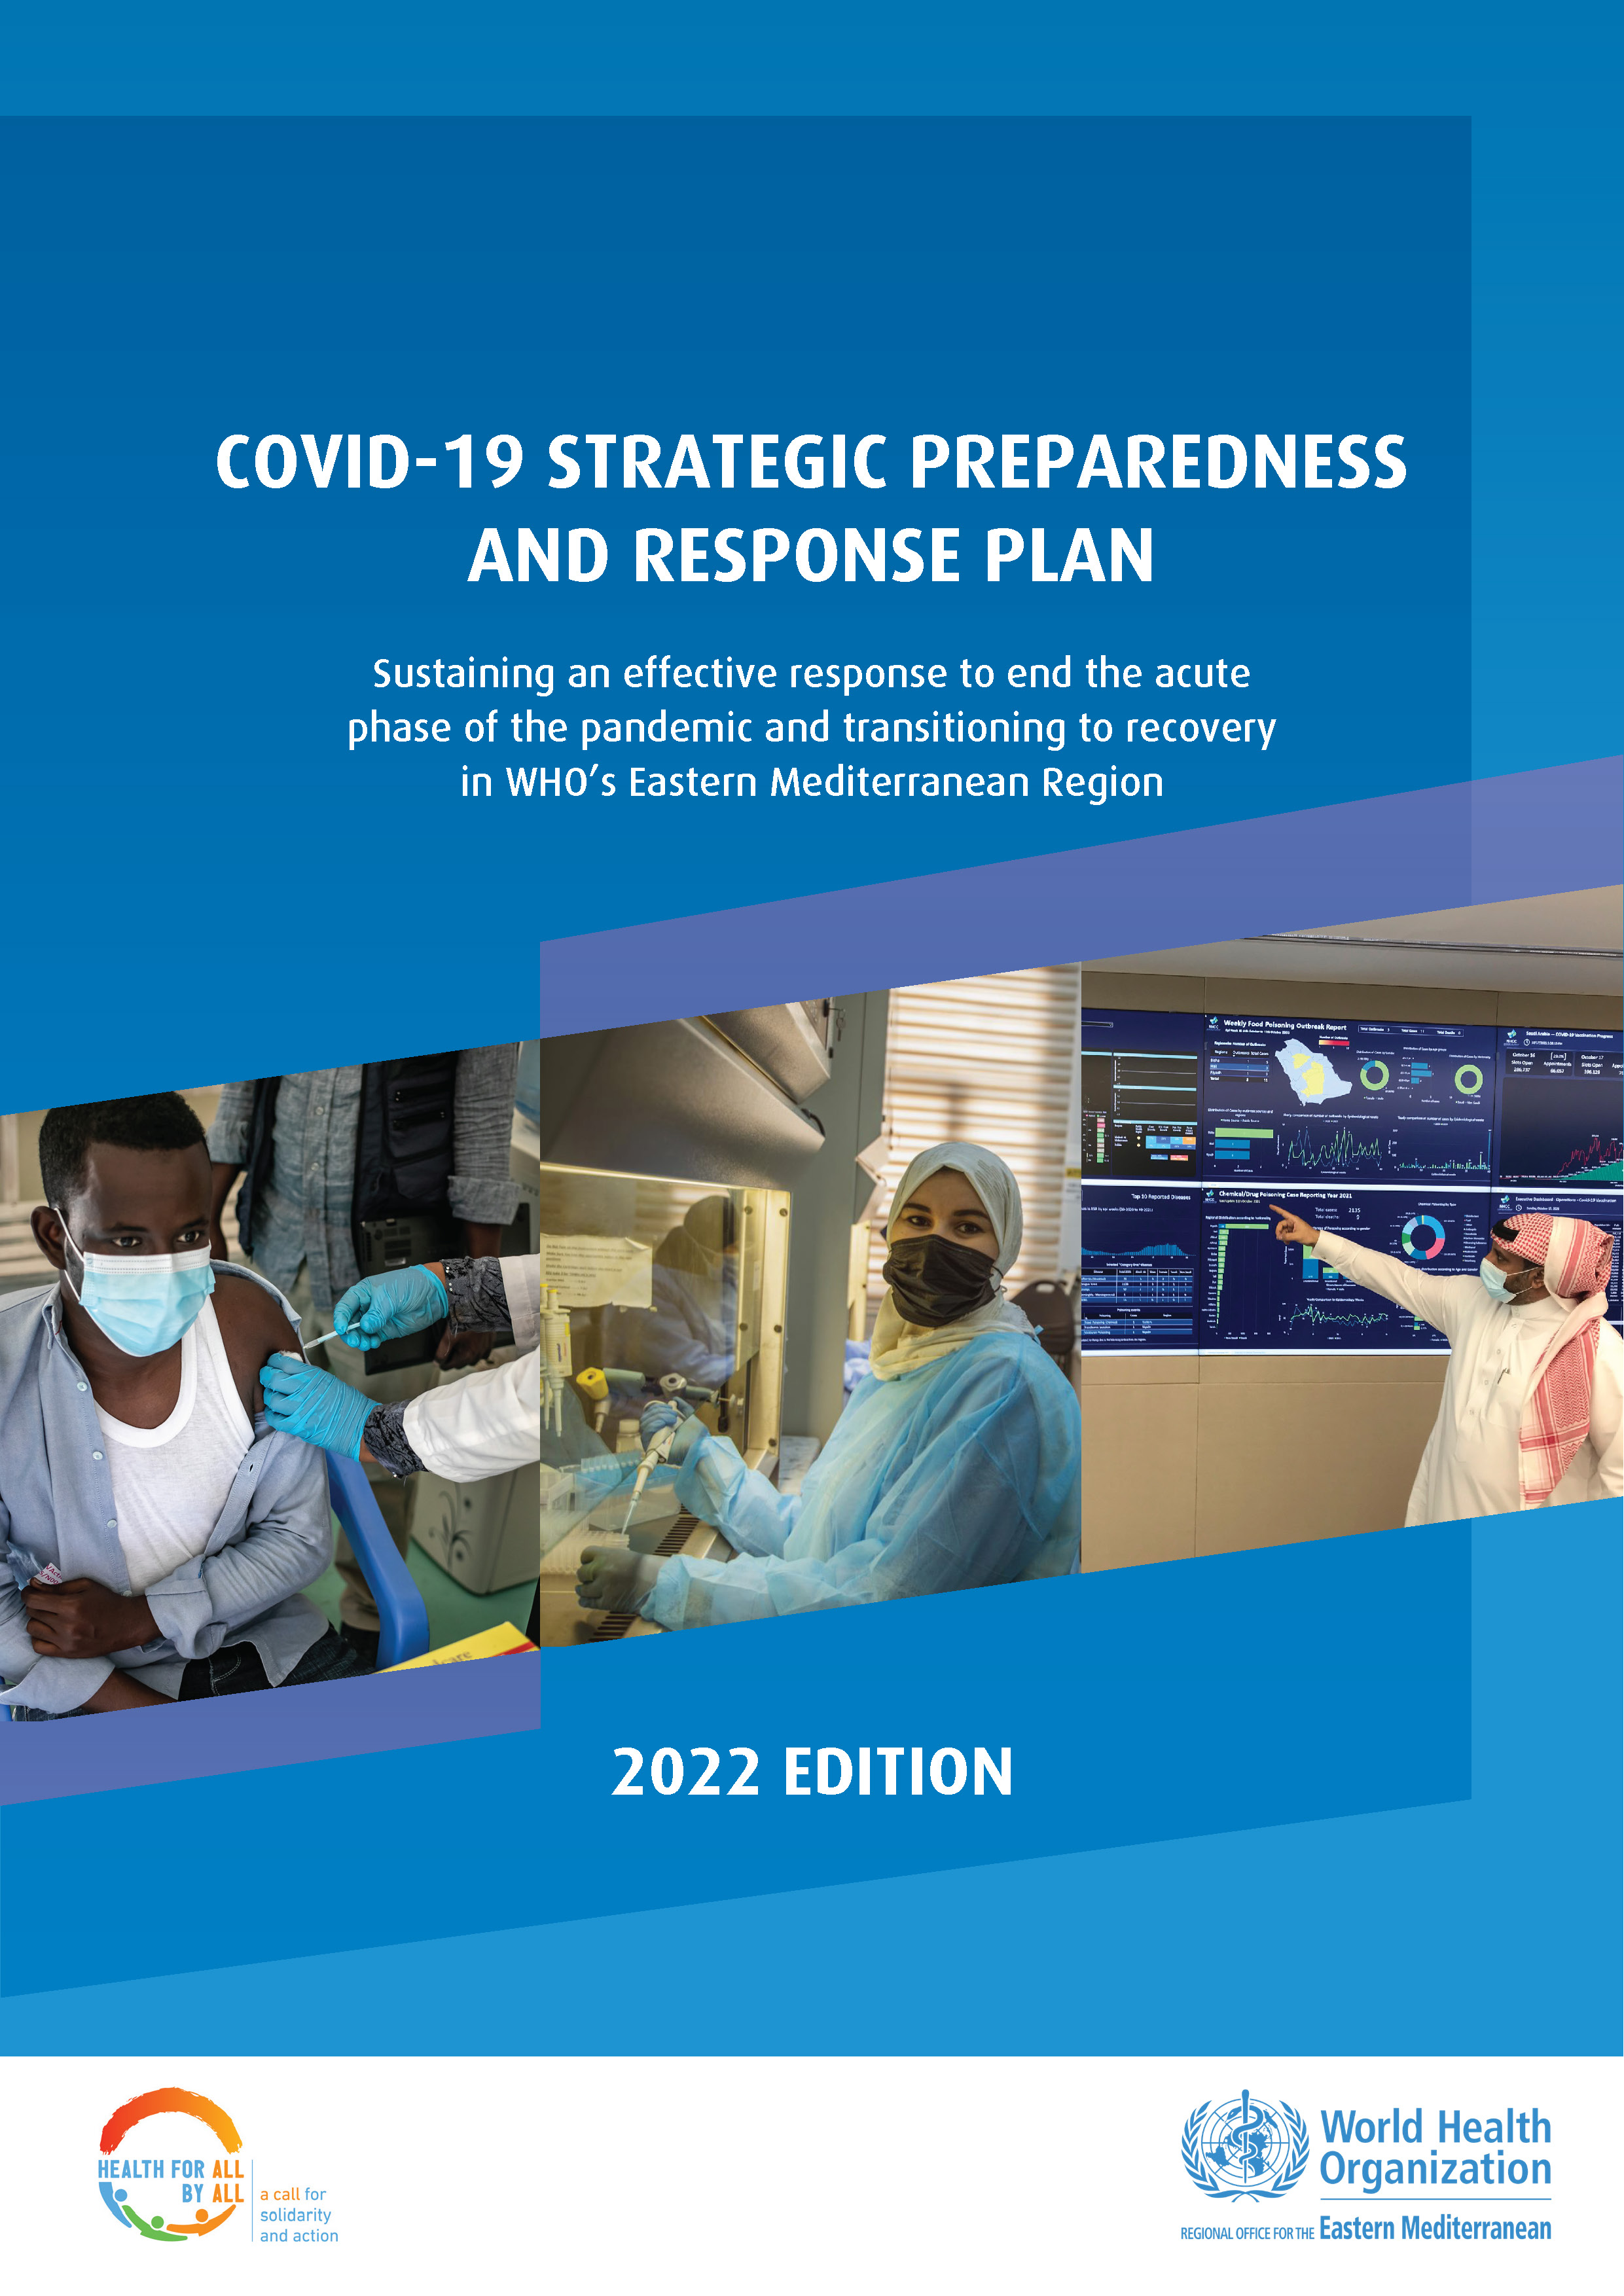 COVID-19 strategic preparedness and response plan: sustaining an effective response to end the acute phase of the pandemic and transitioning to recovery in WHO’s Eastern Mediterranean Region, 2022 edition